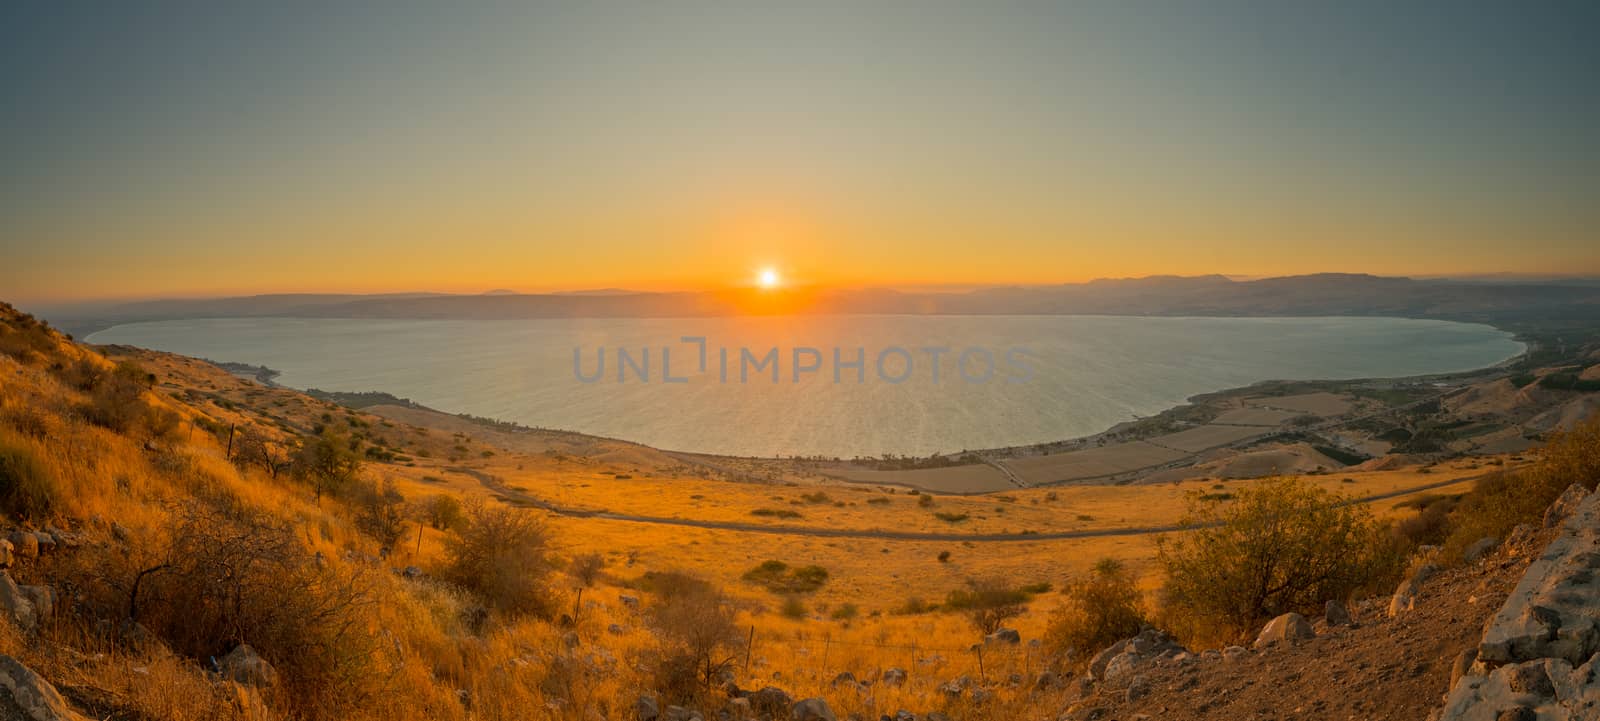 Sea of Galilee (the Kinneret lake), at sunset by RnDmS